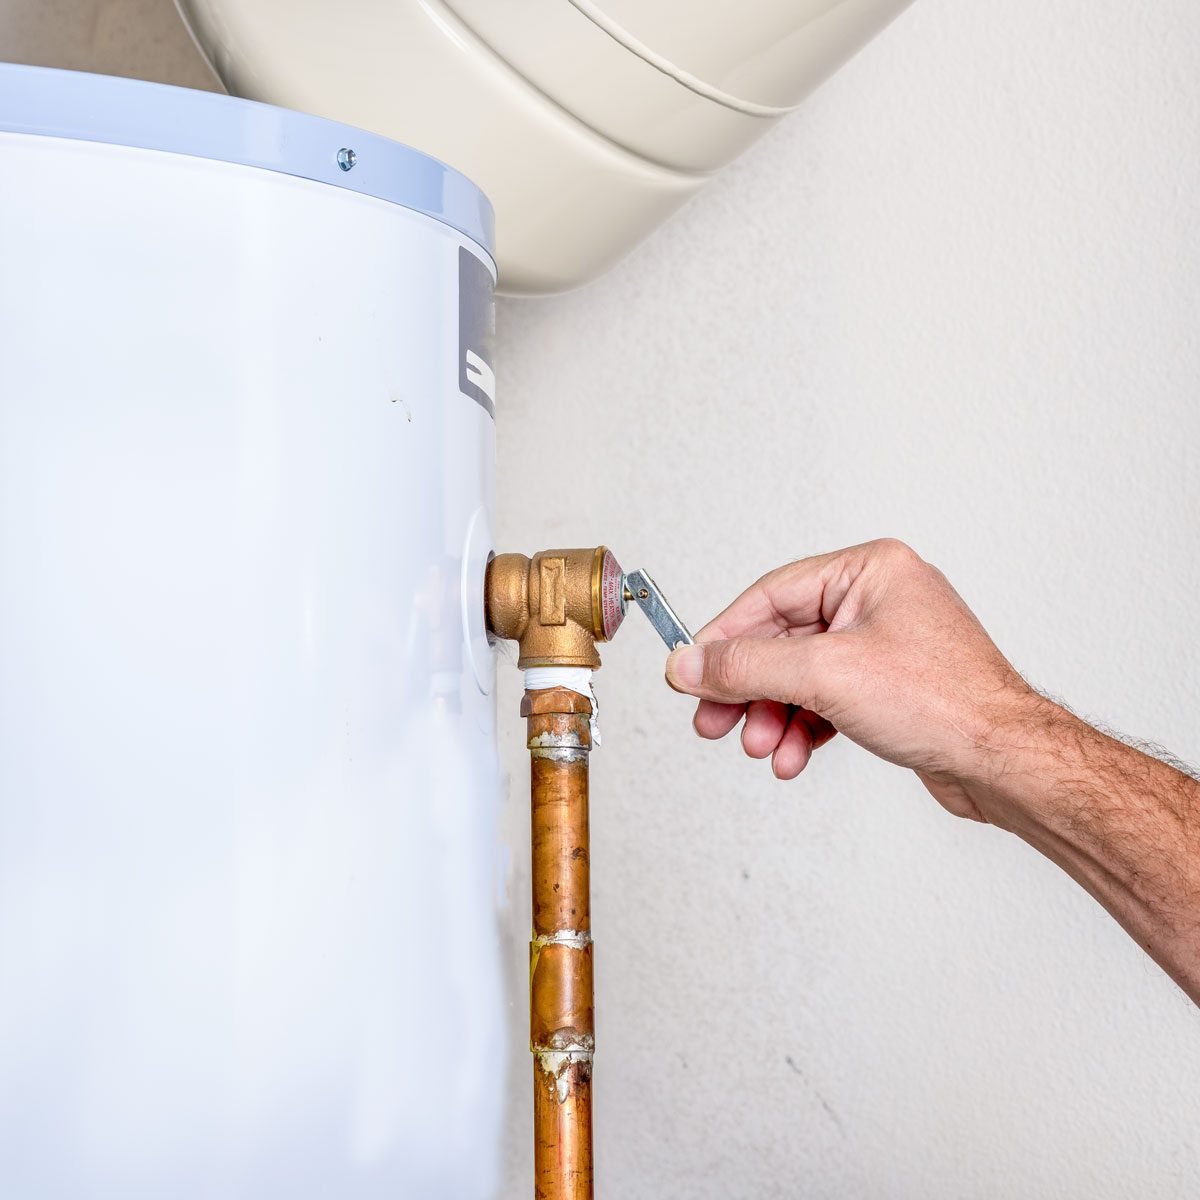 Mans Hand Tugs On The Pressure Relief Valve On A Hot Water Heater